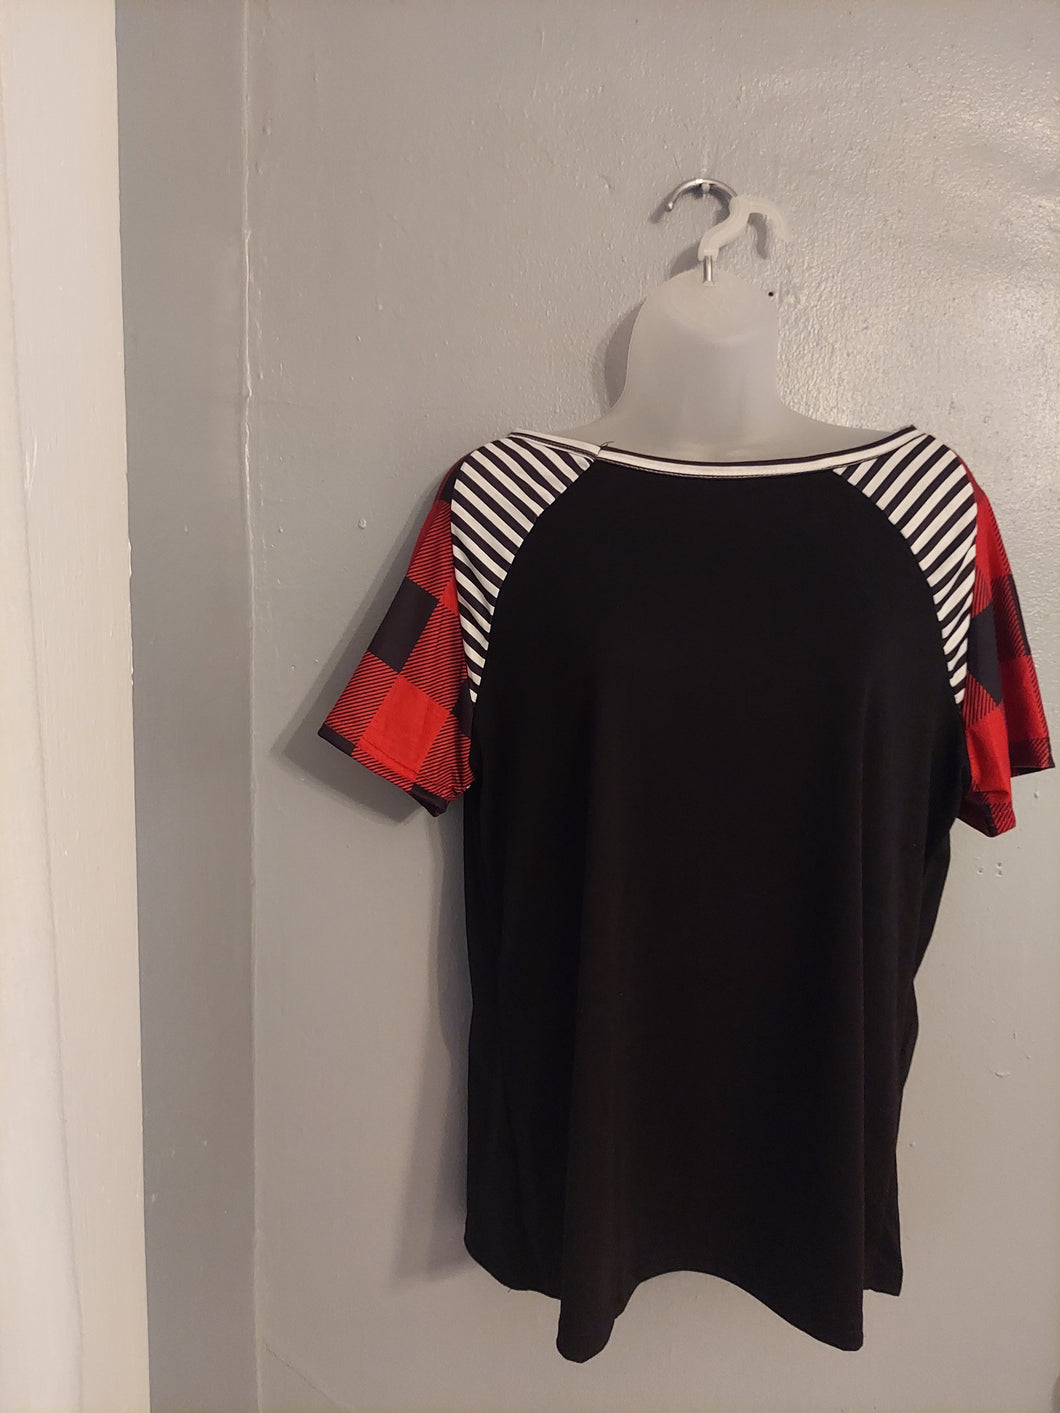 Black Top with Striped and Buffalo Plaid Sleeves